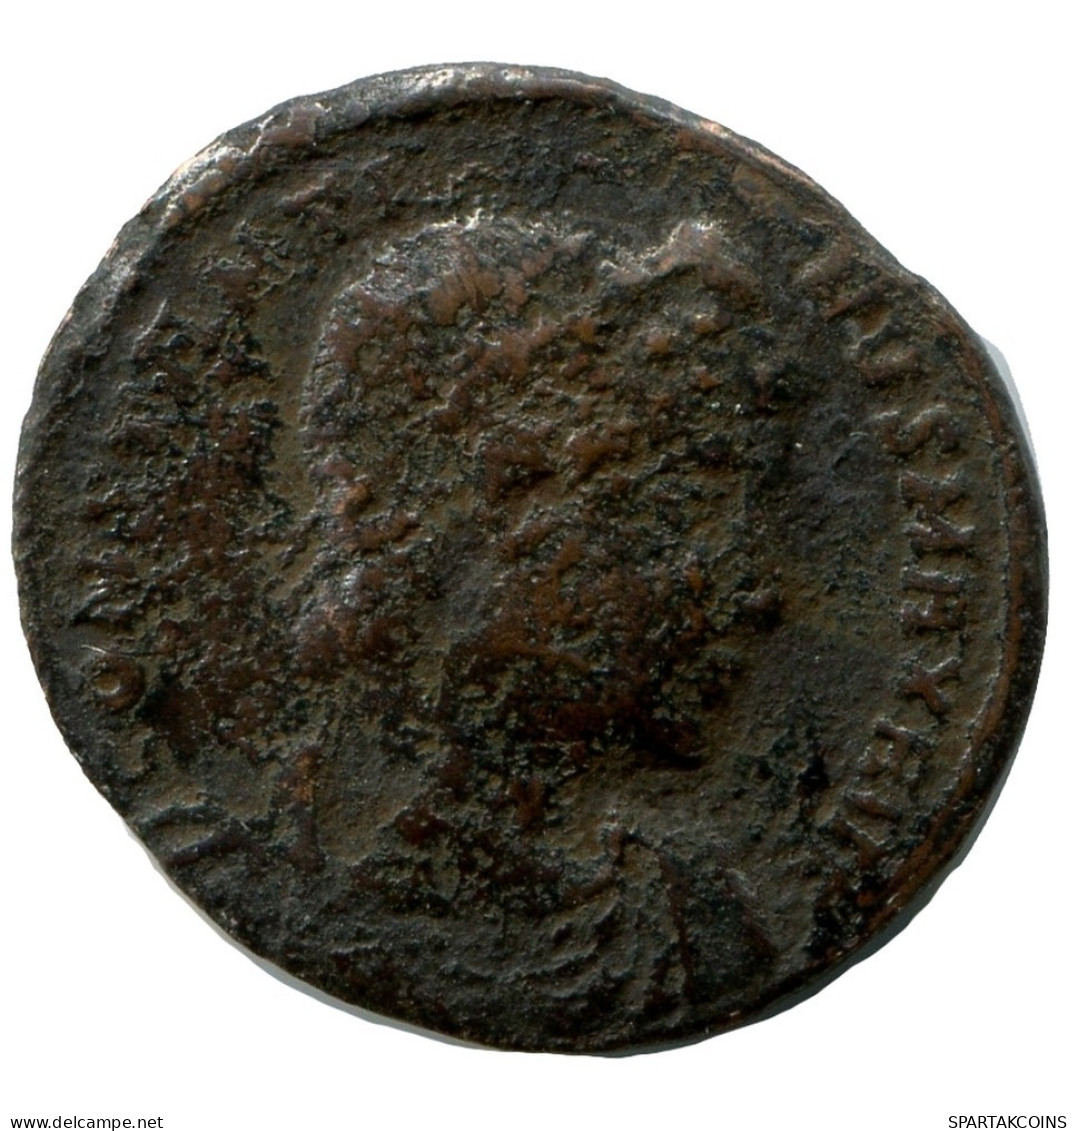 CONSTANTINE I MINTED IN CONSTANTINOPLE FOUND IN IHNASYAH HOARD #ANC10802.14.D.A - L'Empire Chrétien (307 à 363)